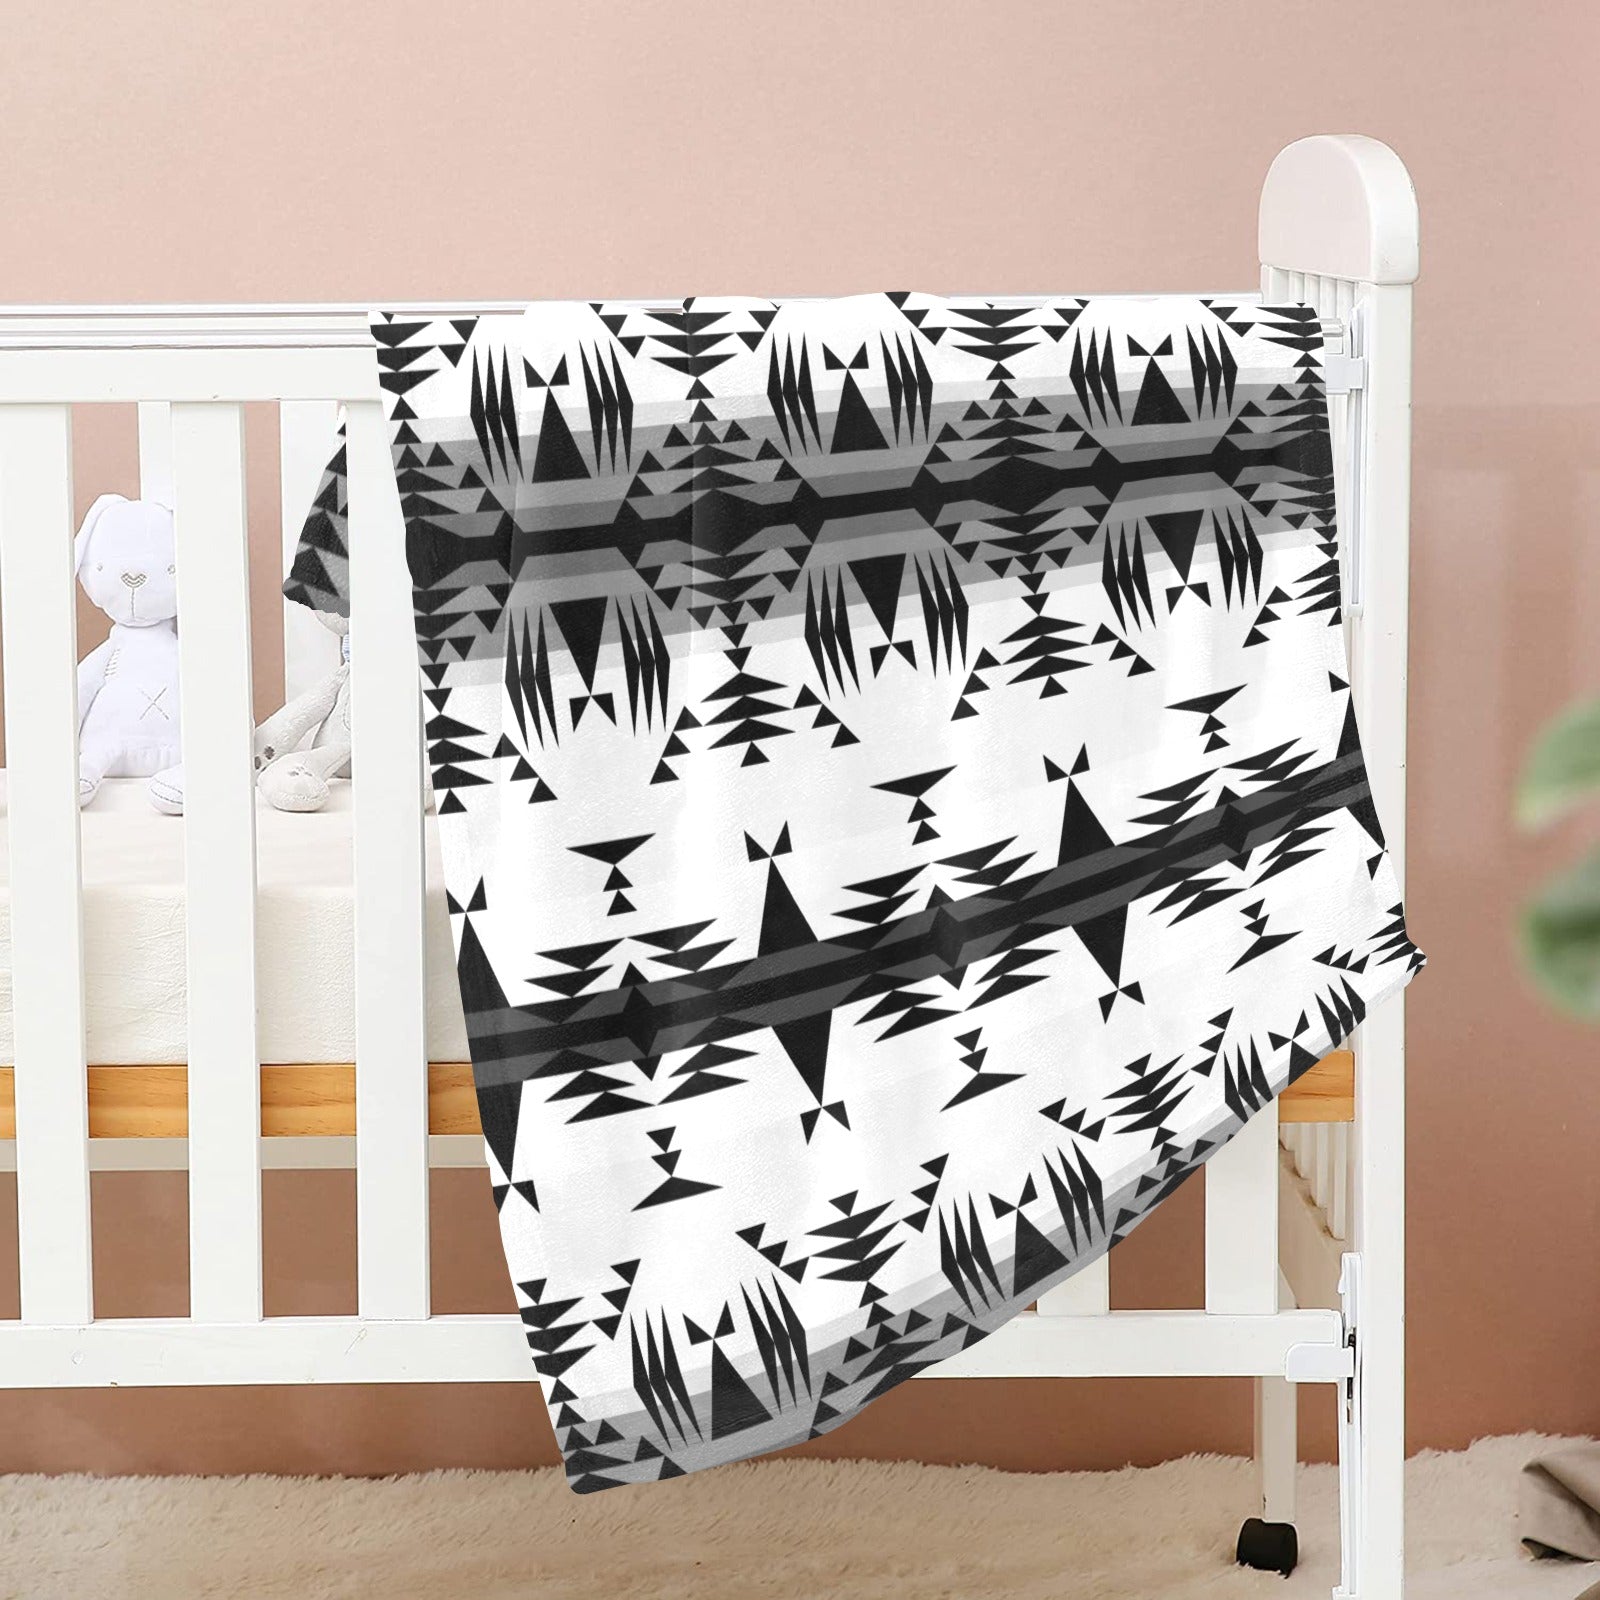 Between the Mountains White and Black Baby Blanket 40"x50" Baby Blanket 40"x50" e-joyer 